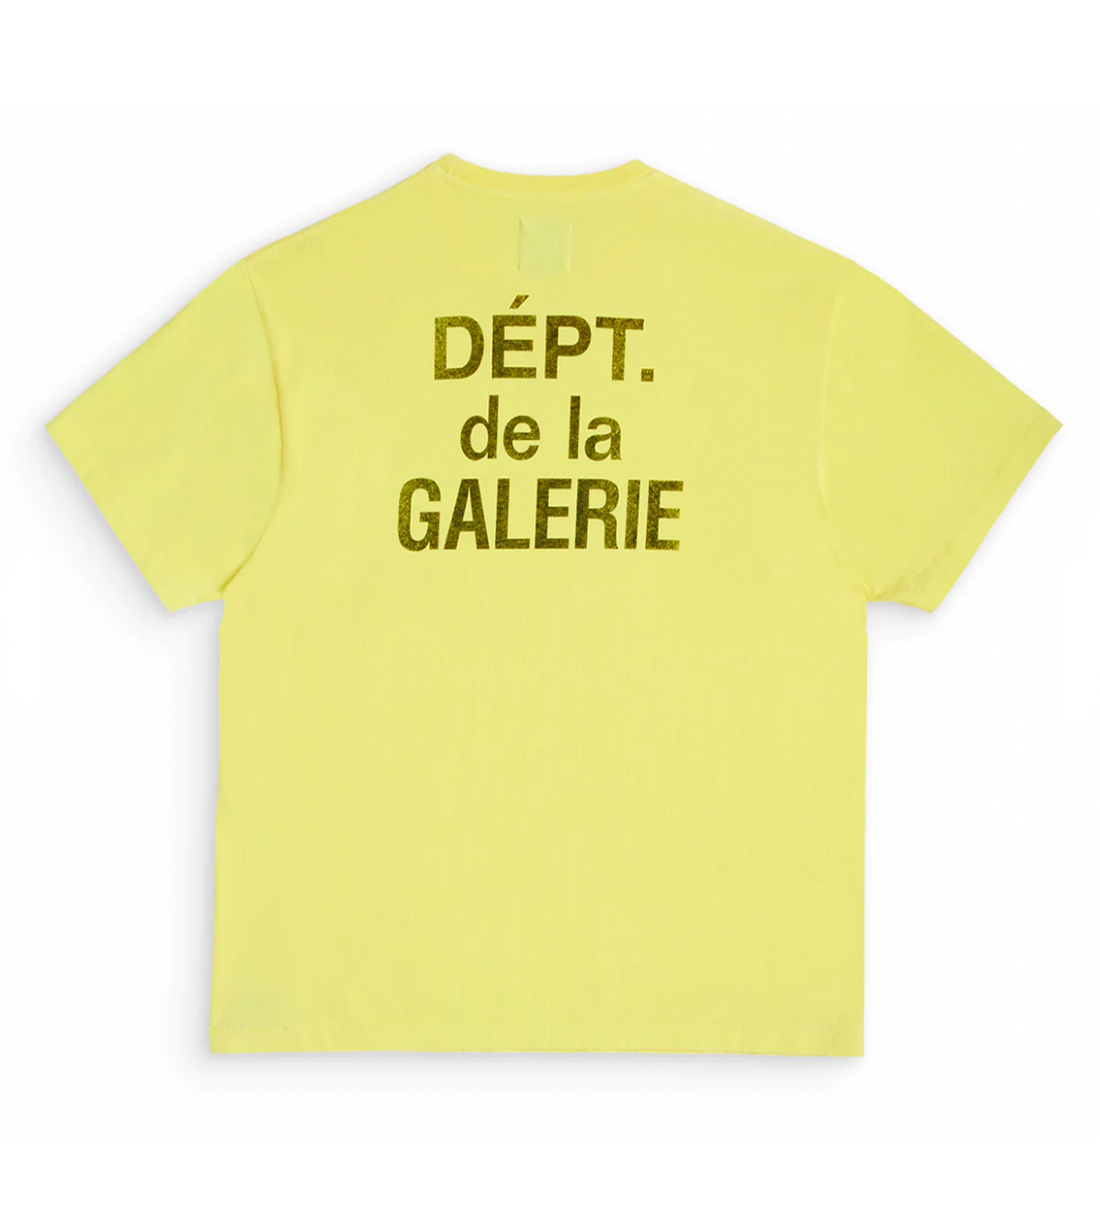 Gallery Dept. French Souvenir Flo Neon Yellow Tee, Back View